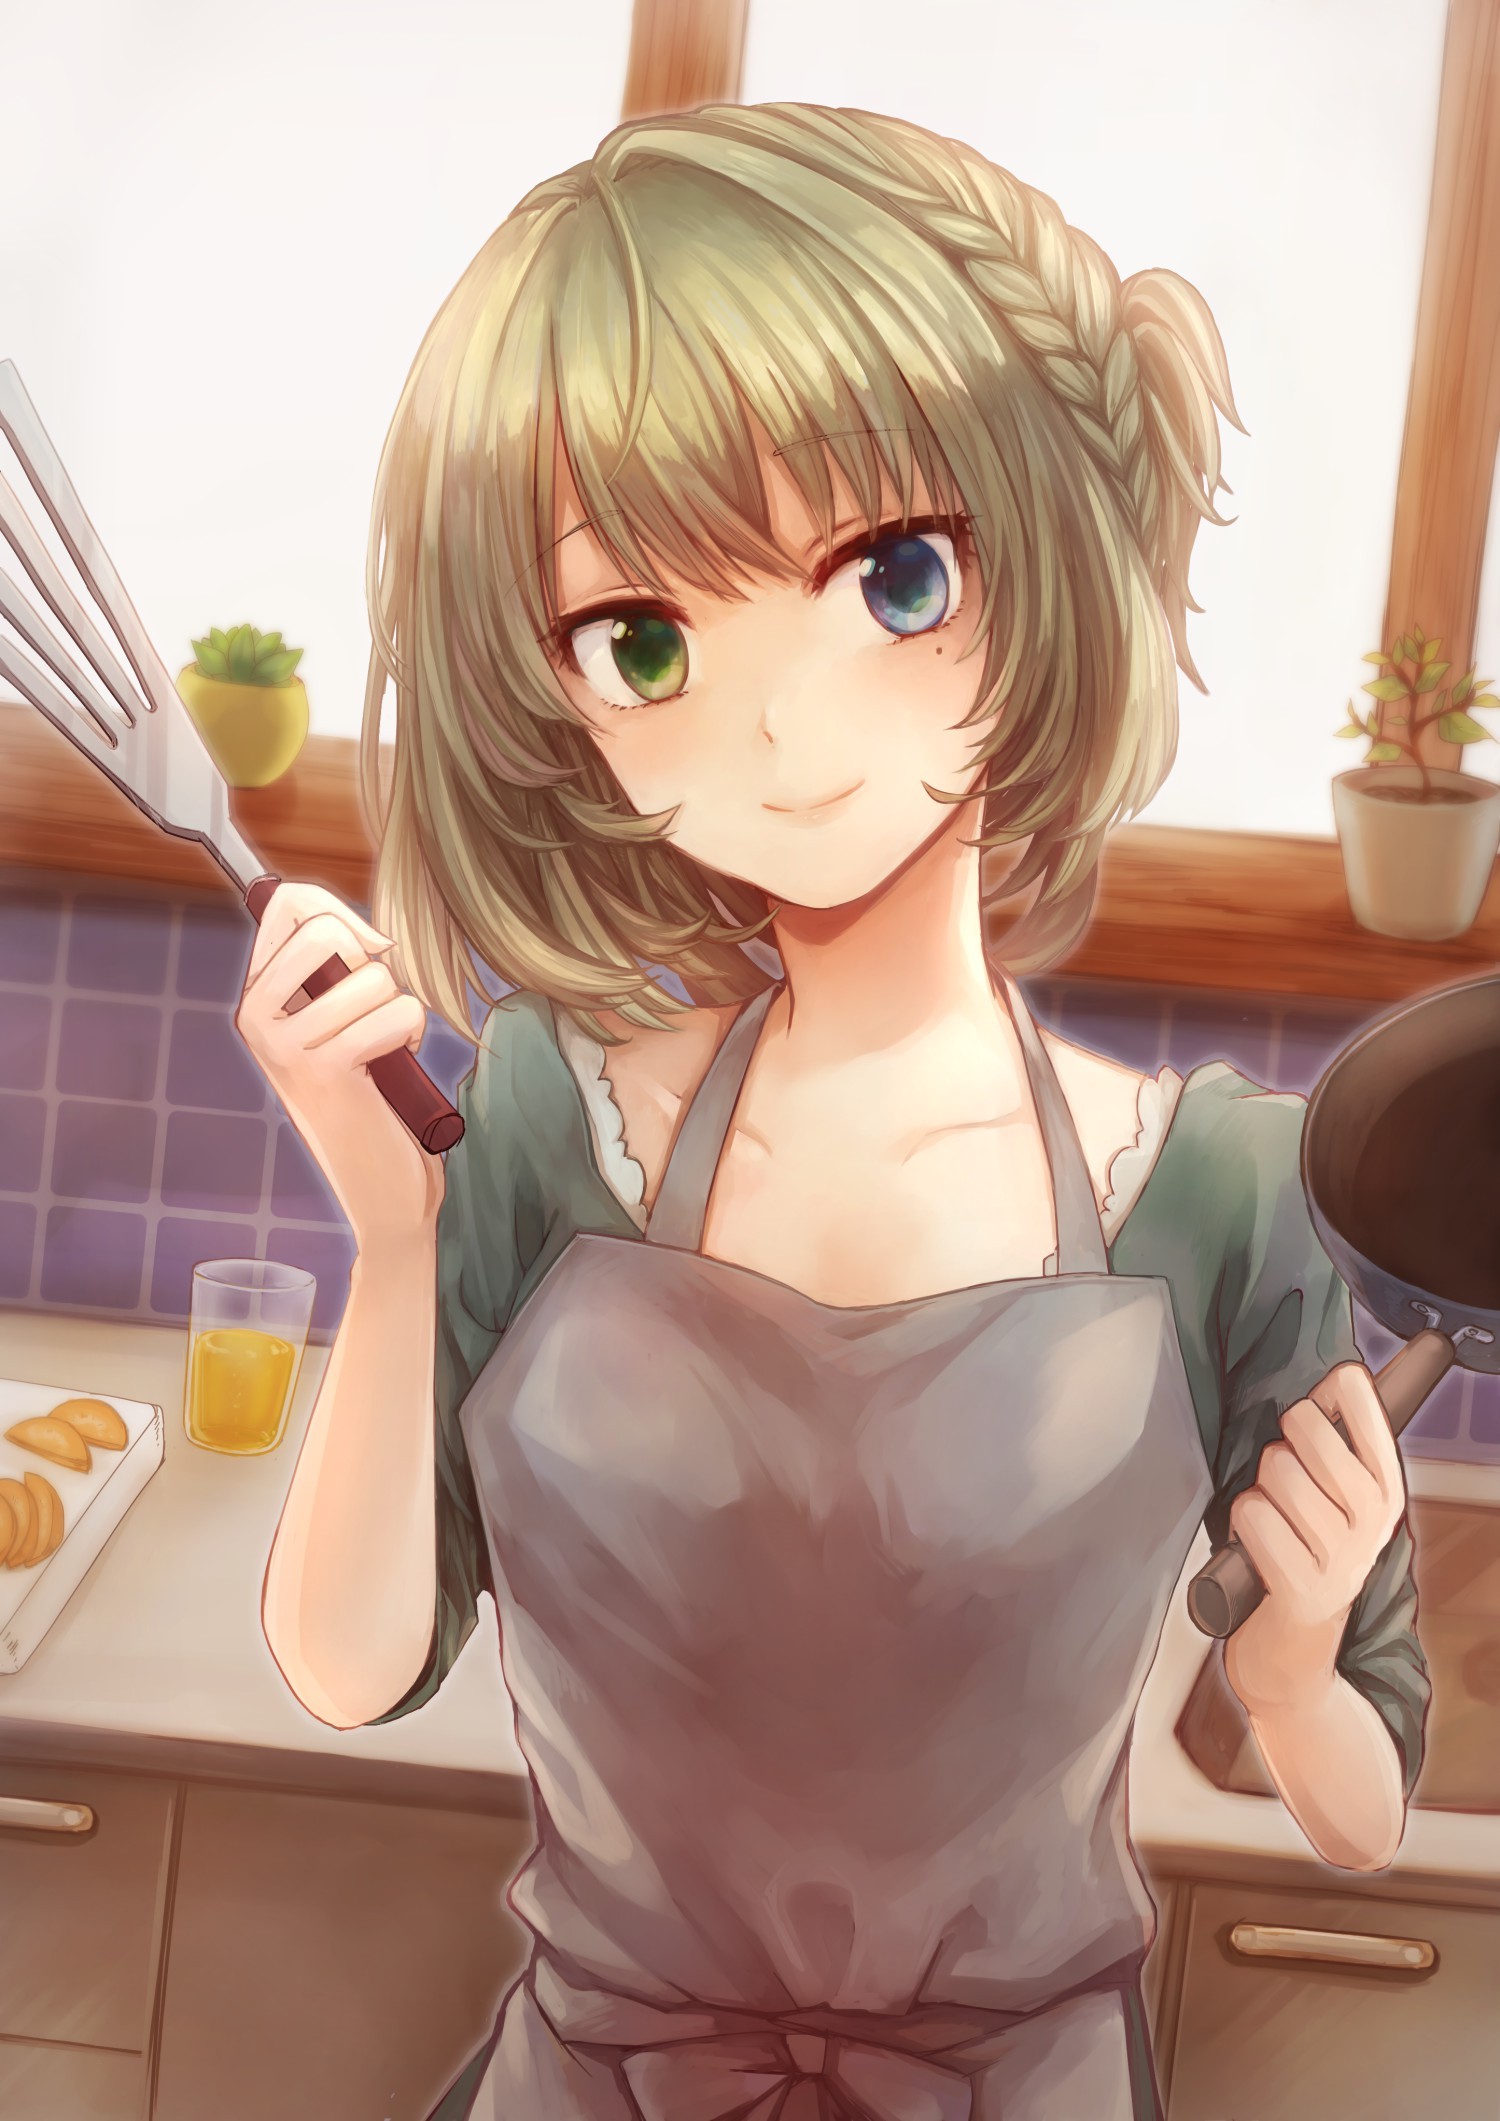 Anime 1500x2121 anime anime girls THE iDOLM@STER THE iDOLM@STER: Cinderella Girls Takagaki Kaede heterochromia cooking Pans (Tool) smiling women indoors indoors kitchen looking at viewer Pixiv